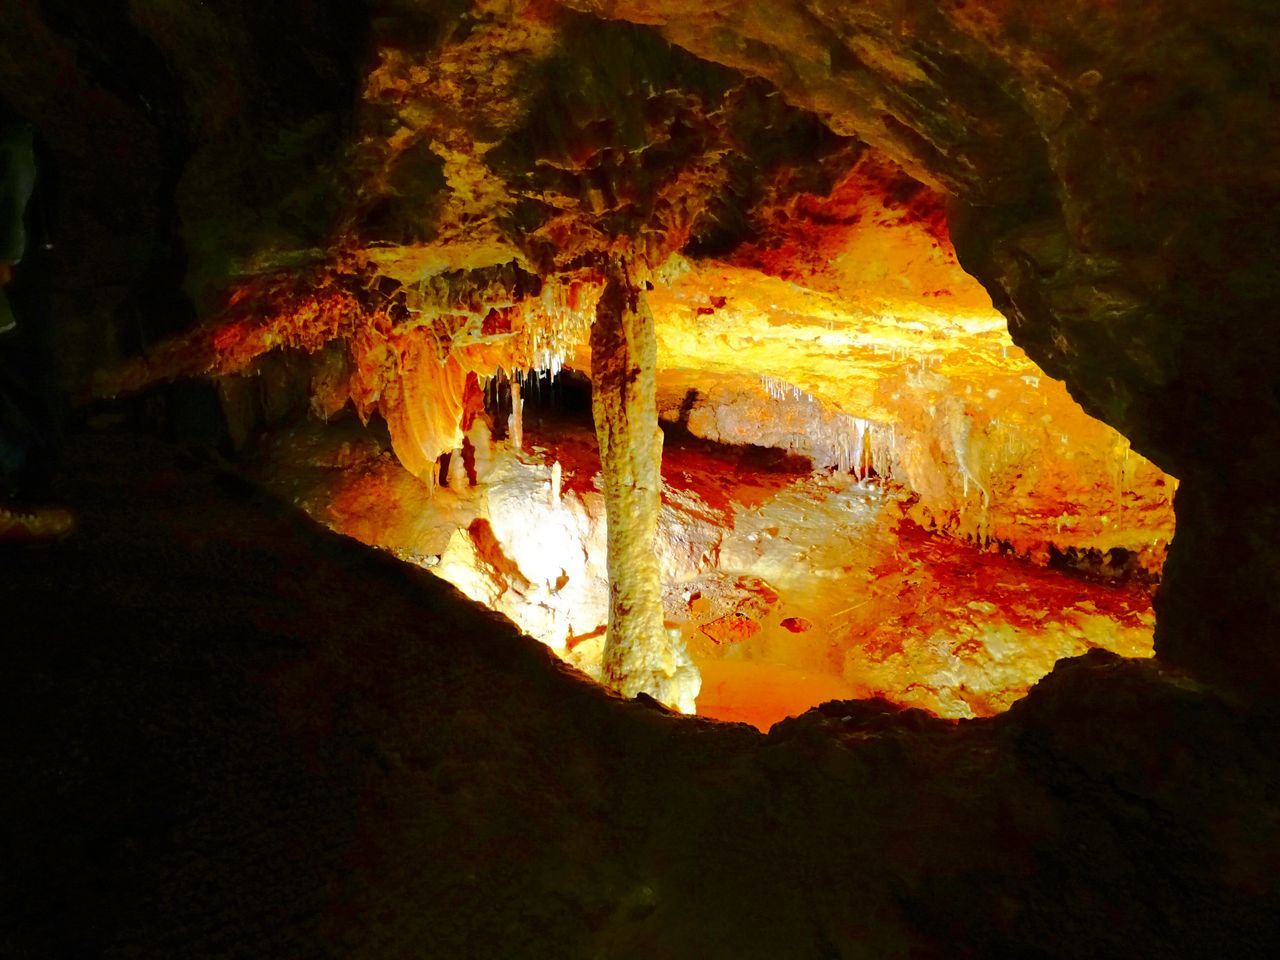 cave, rock, caving, geology, no people, nature, rock formation, beauty in nature, stalactite, illuminated, physical geography, formation, stalagmite, outdoors, non-urban scene, travel destinations